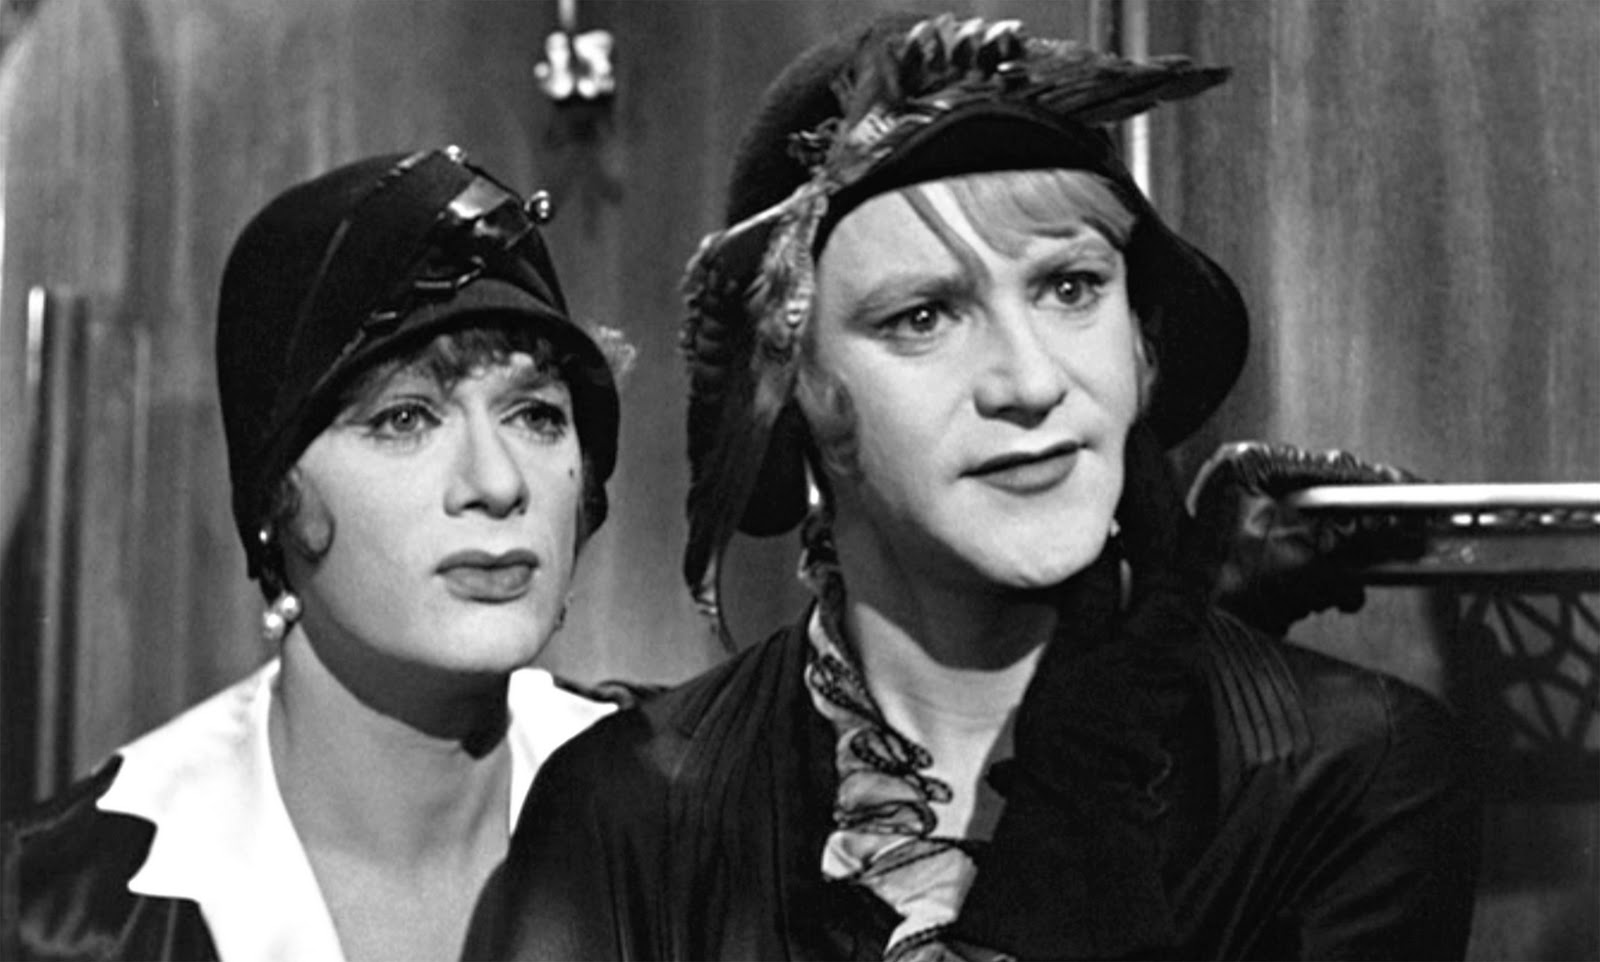 How did “Some Like it Hot” challenge gender norms and censorship rules of the era? | Read | The Take